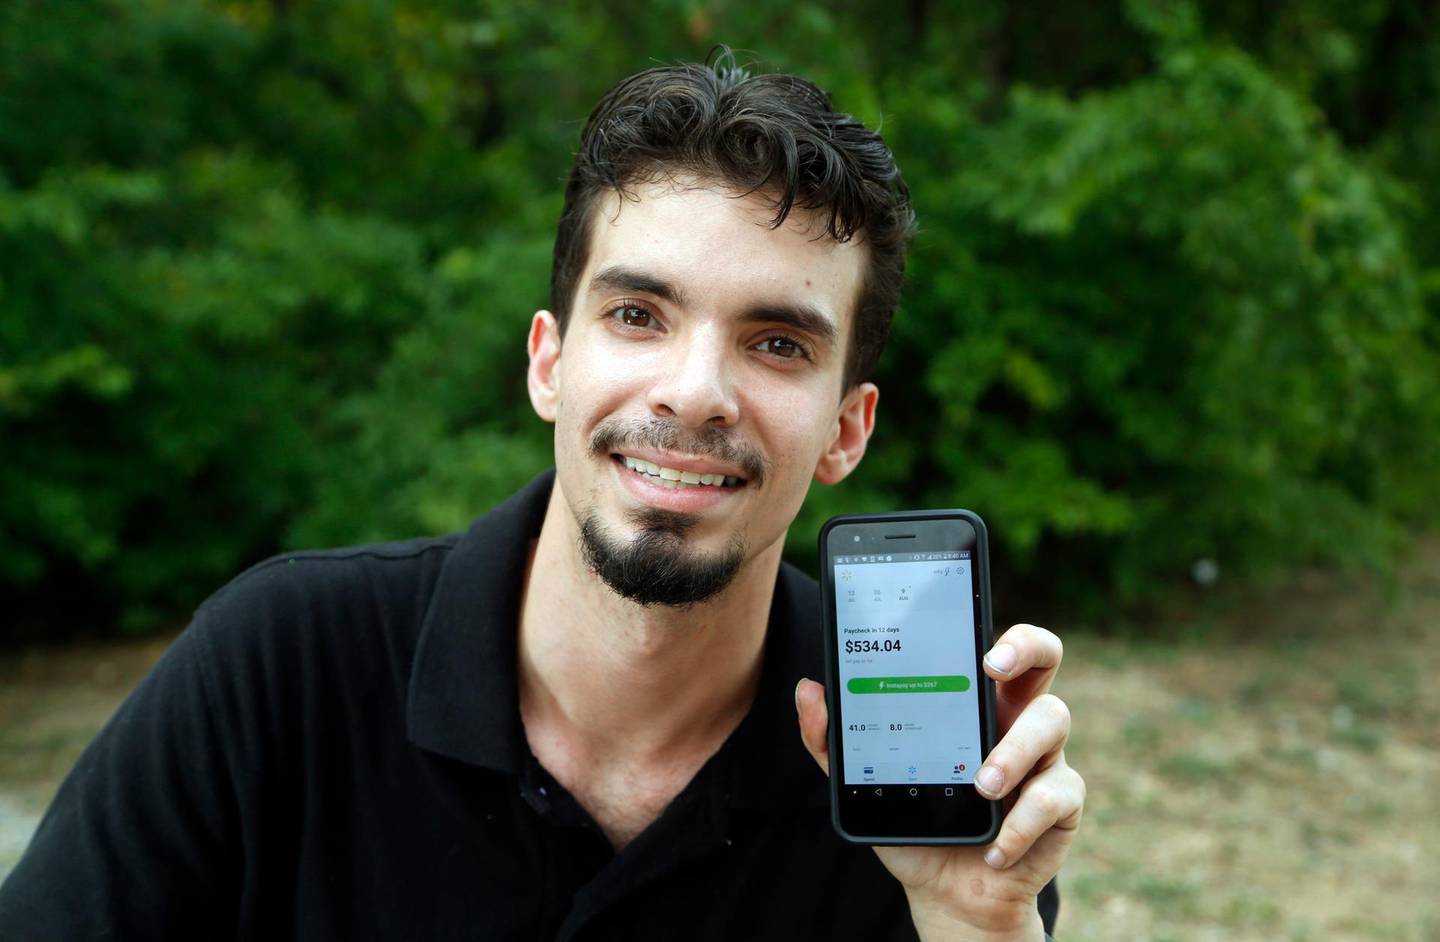 In this July 28, 2018, photo, Luis Vazquez, an overnight support manager at Walmart in Dallas, poses for a photo. He uses the Instapay app, developed by technology company Even, to assist him with his finances. The phone app allows users to access up to 50 percent of their earned wages during a pay period and avoid payday loans. (AP Photo/Michael Ainsworth)